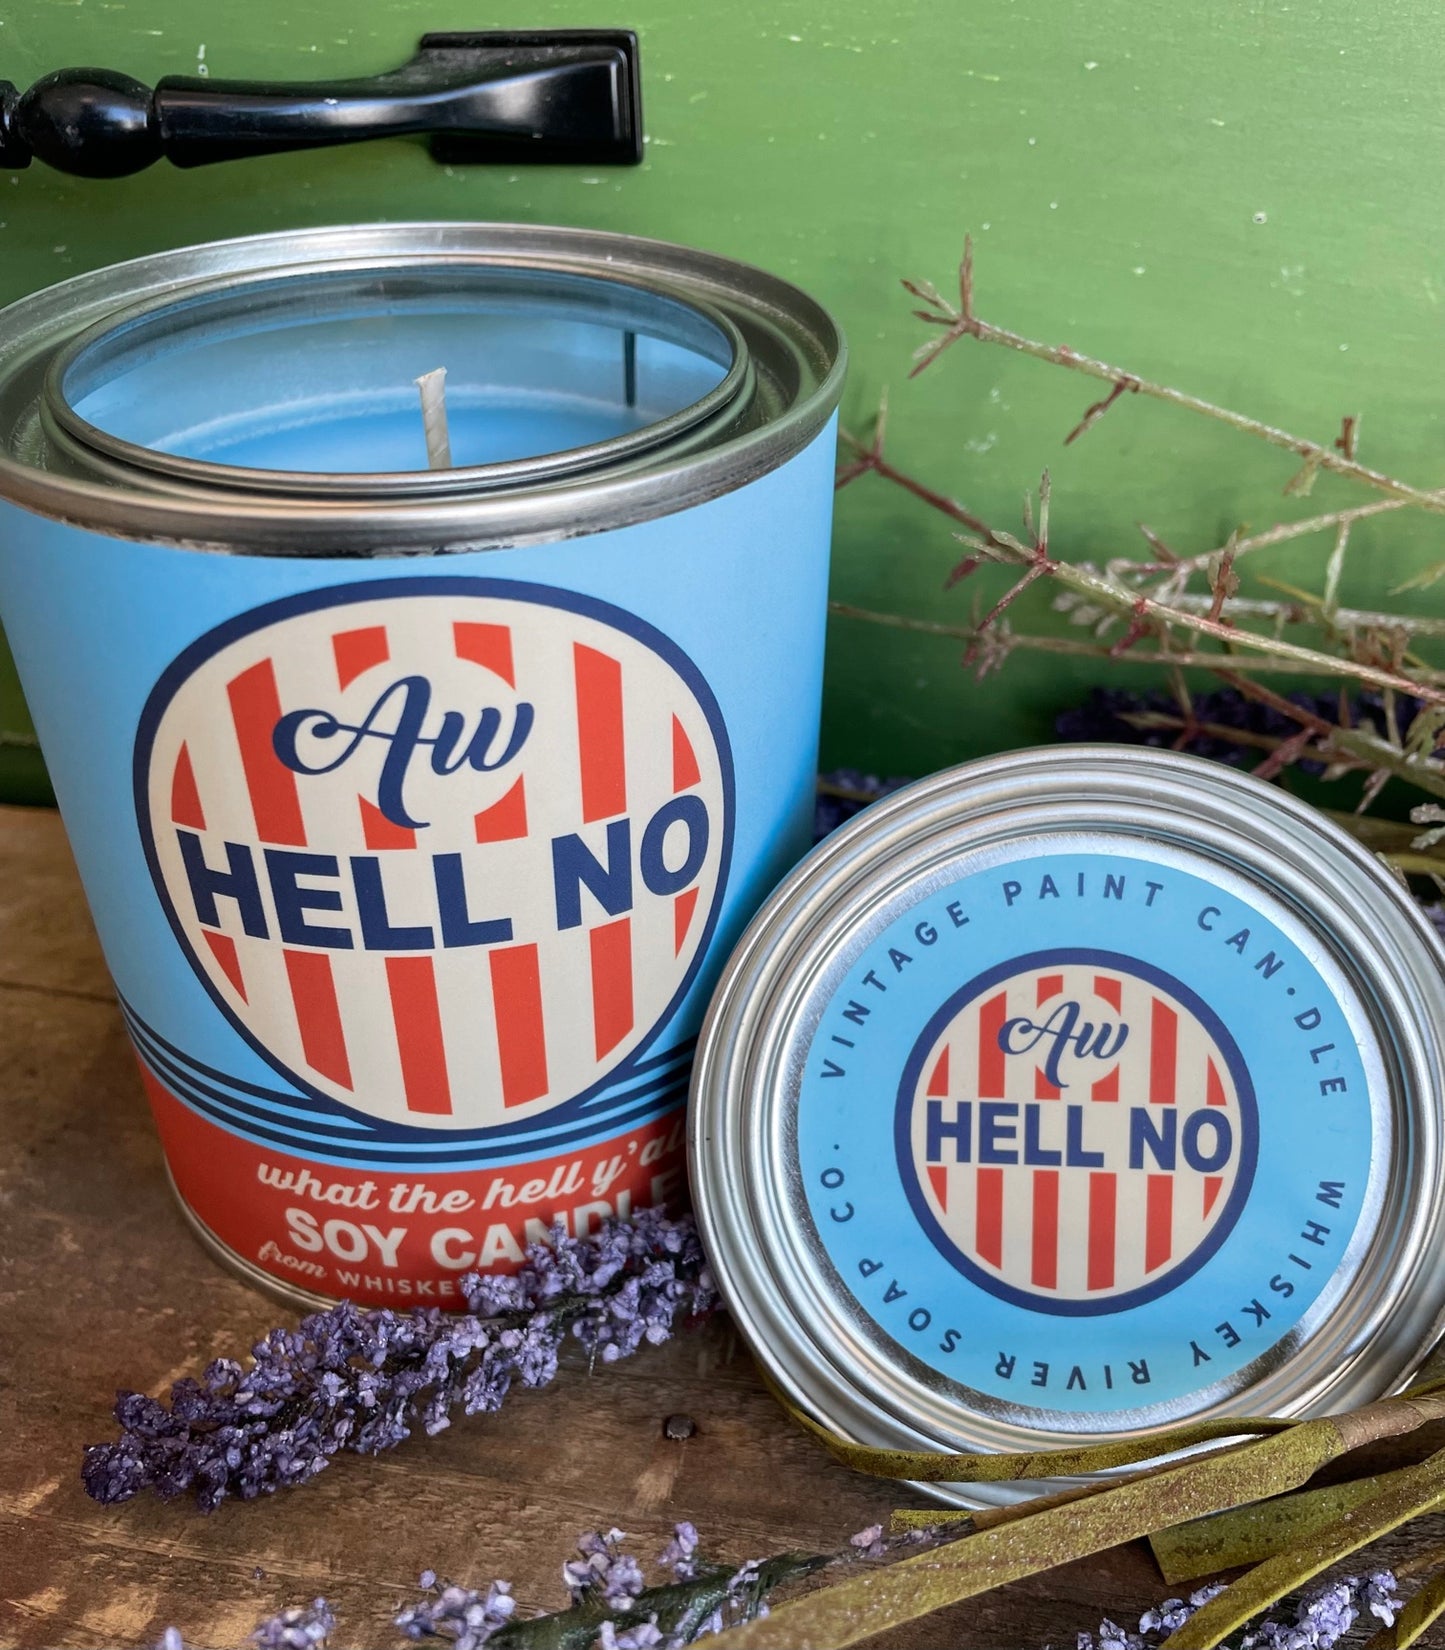 "Aw Hell No" Vintage Paint Soy Candle